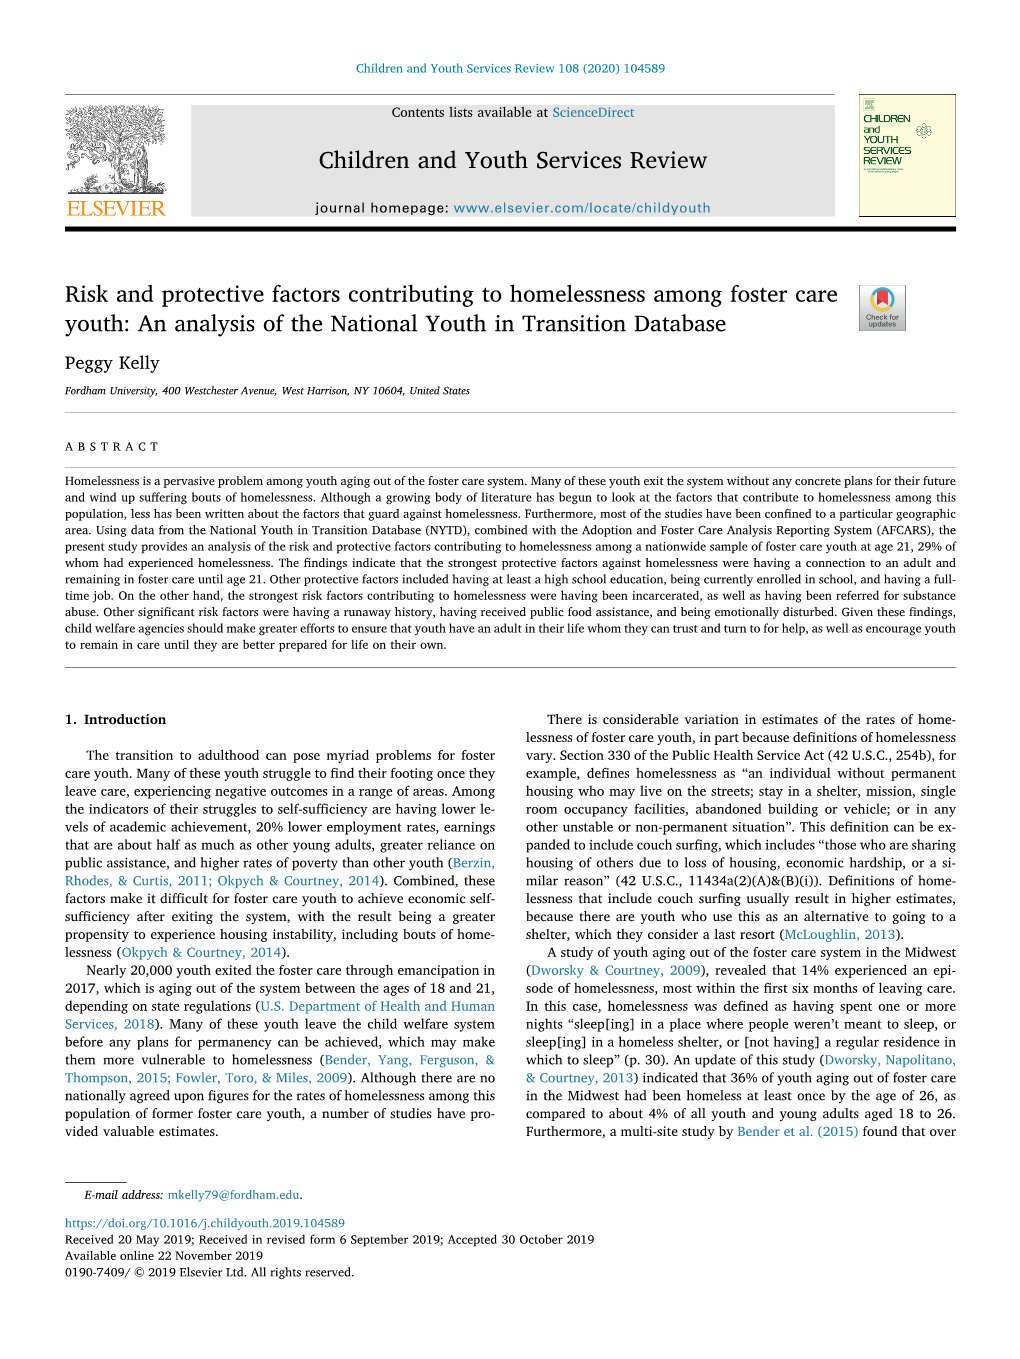 Risk and Protective Factors Contributing to Homelessness Among Foster Care Youth: an Analysis of the National Youth in Transition Database T